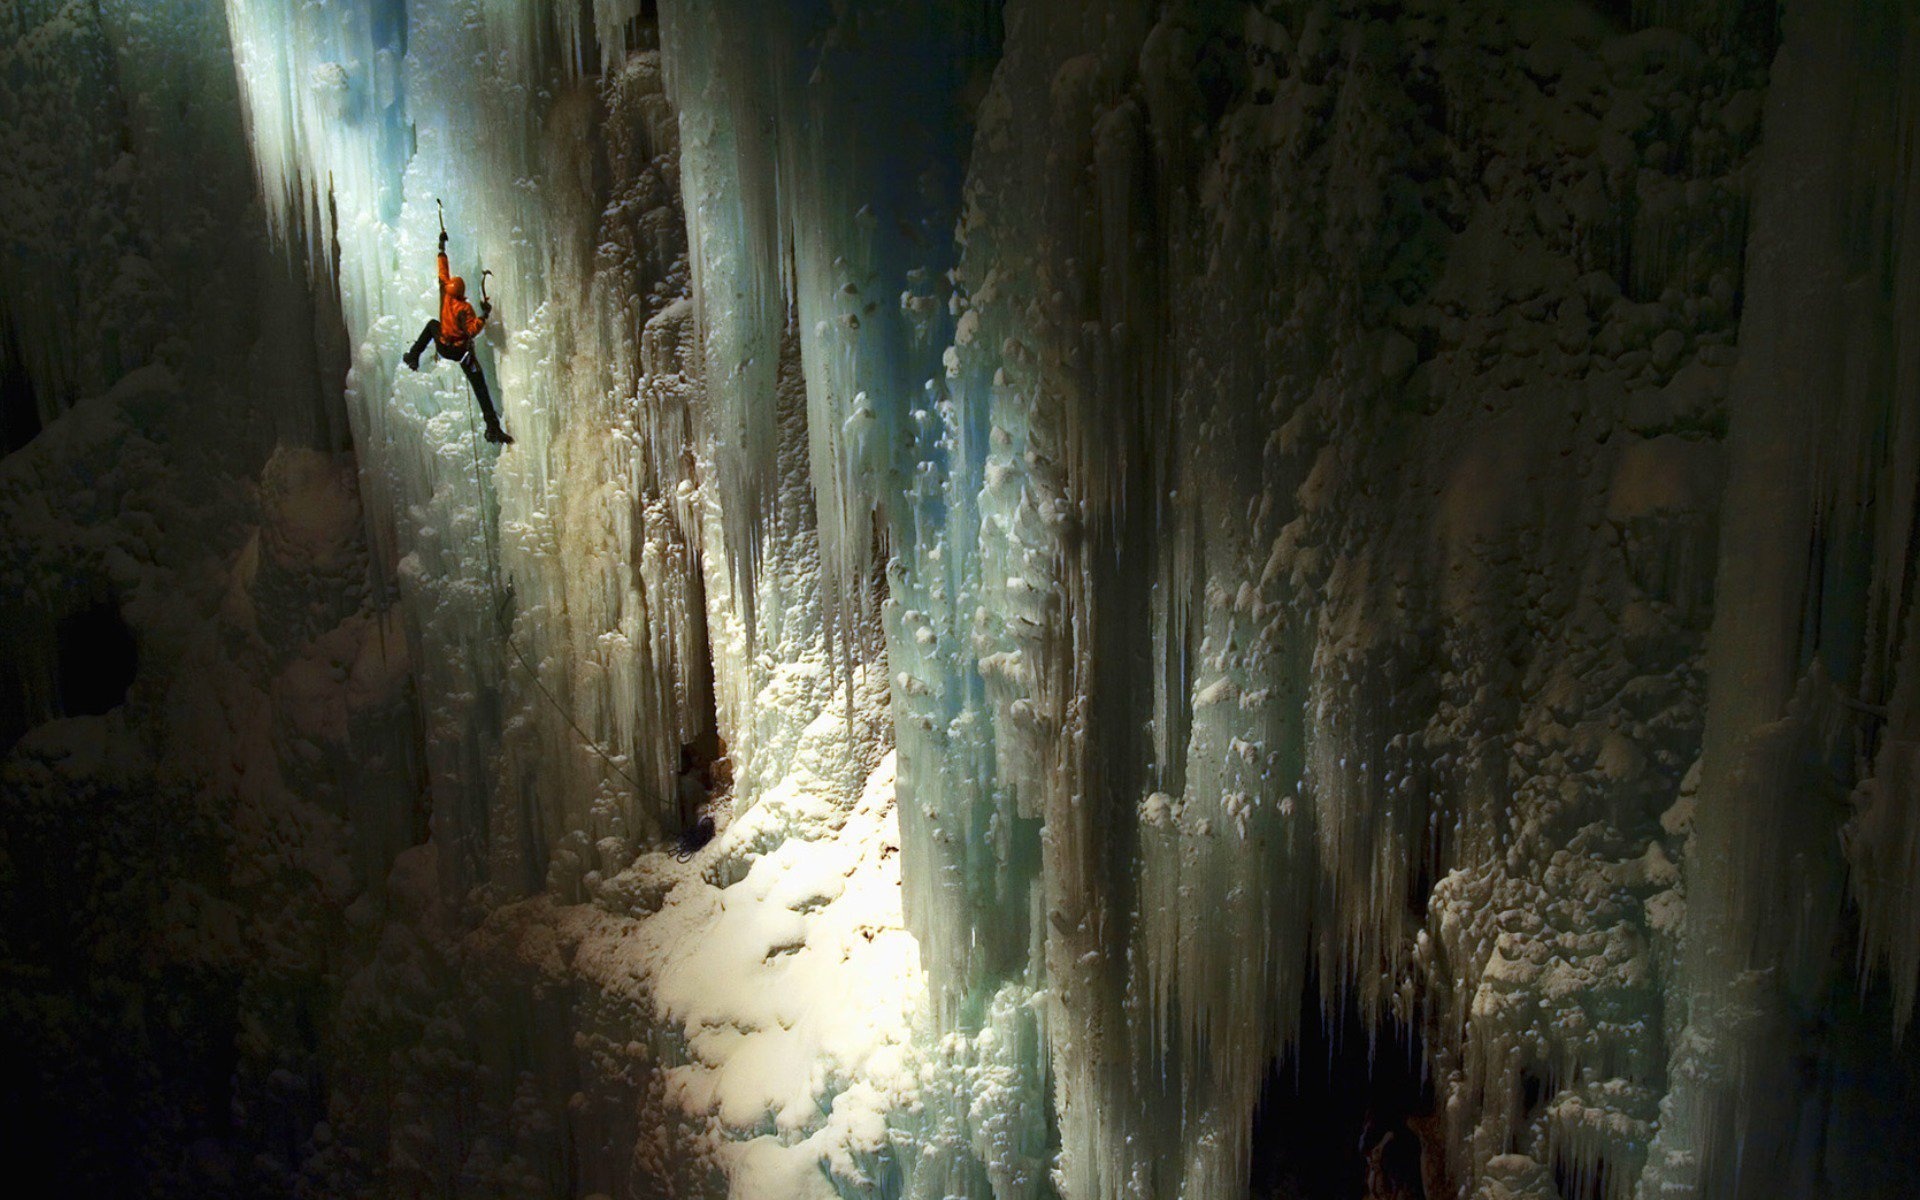 Ice Climbing: Ice Climbing In A Cave, Caving Gear And Equipment Essentials, Vertical Addiction, Karst Sports. 1920x1200 HD Wallpaper.